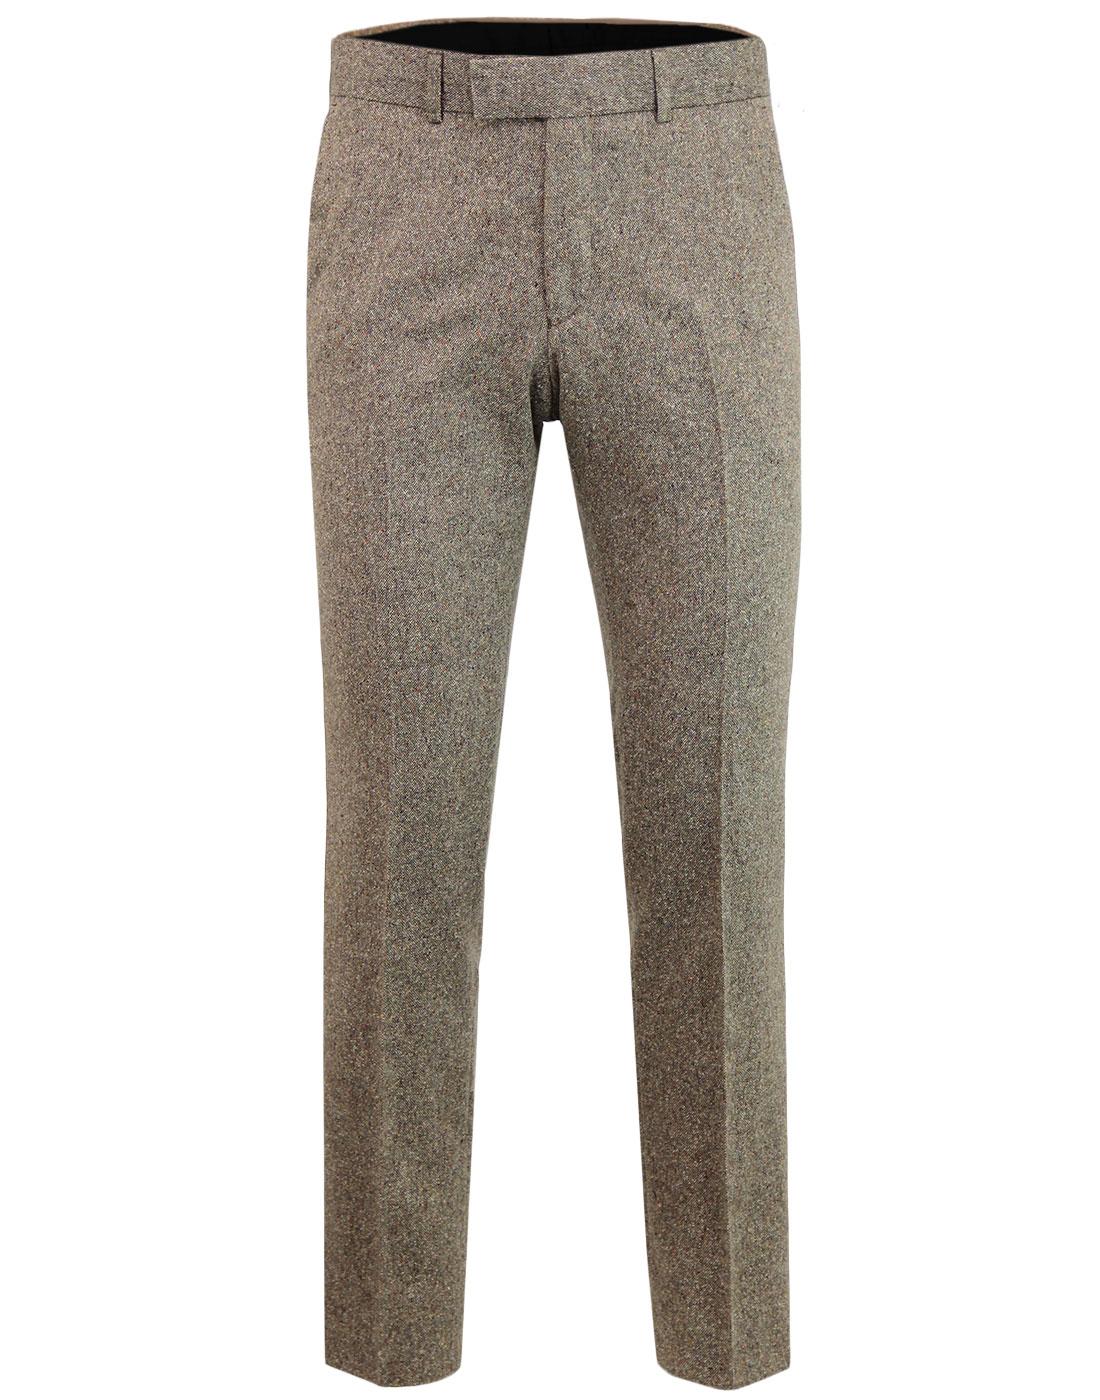 Men's Retro 60s Mod Donegal Fleck Suit Trousers in Biscuit